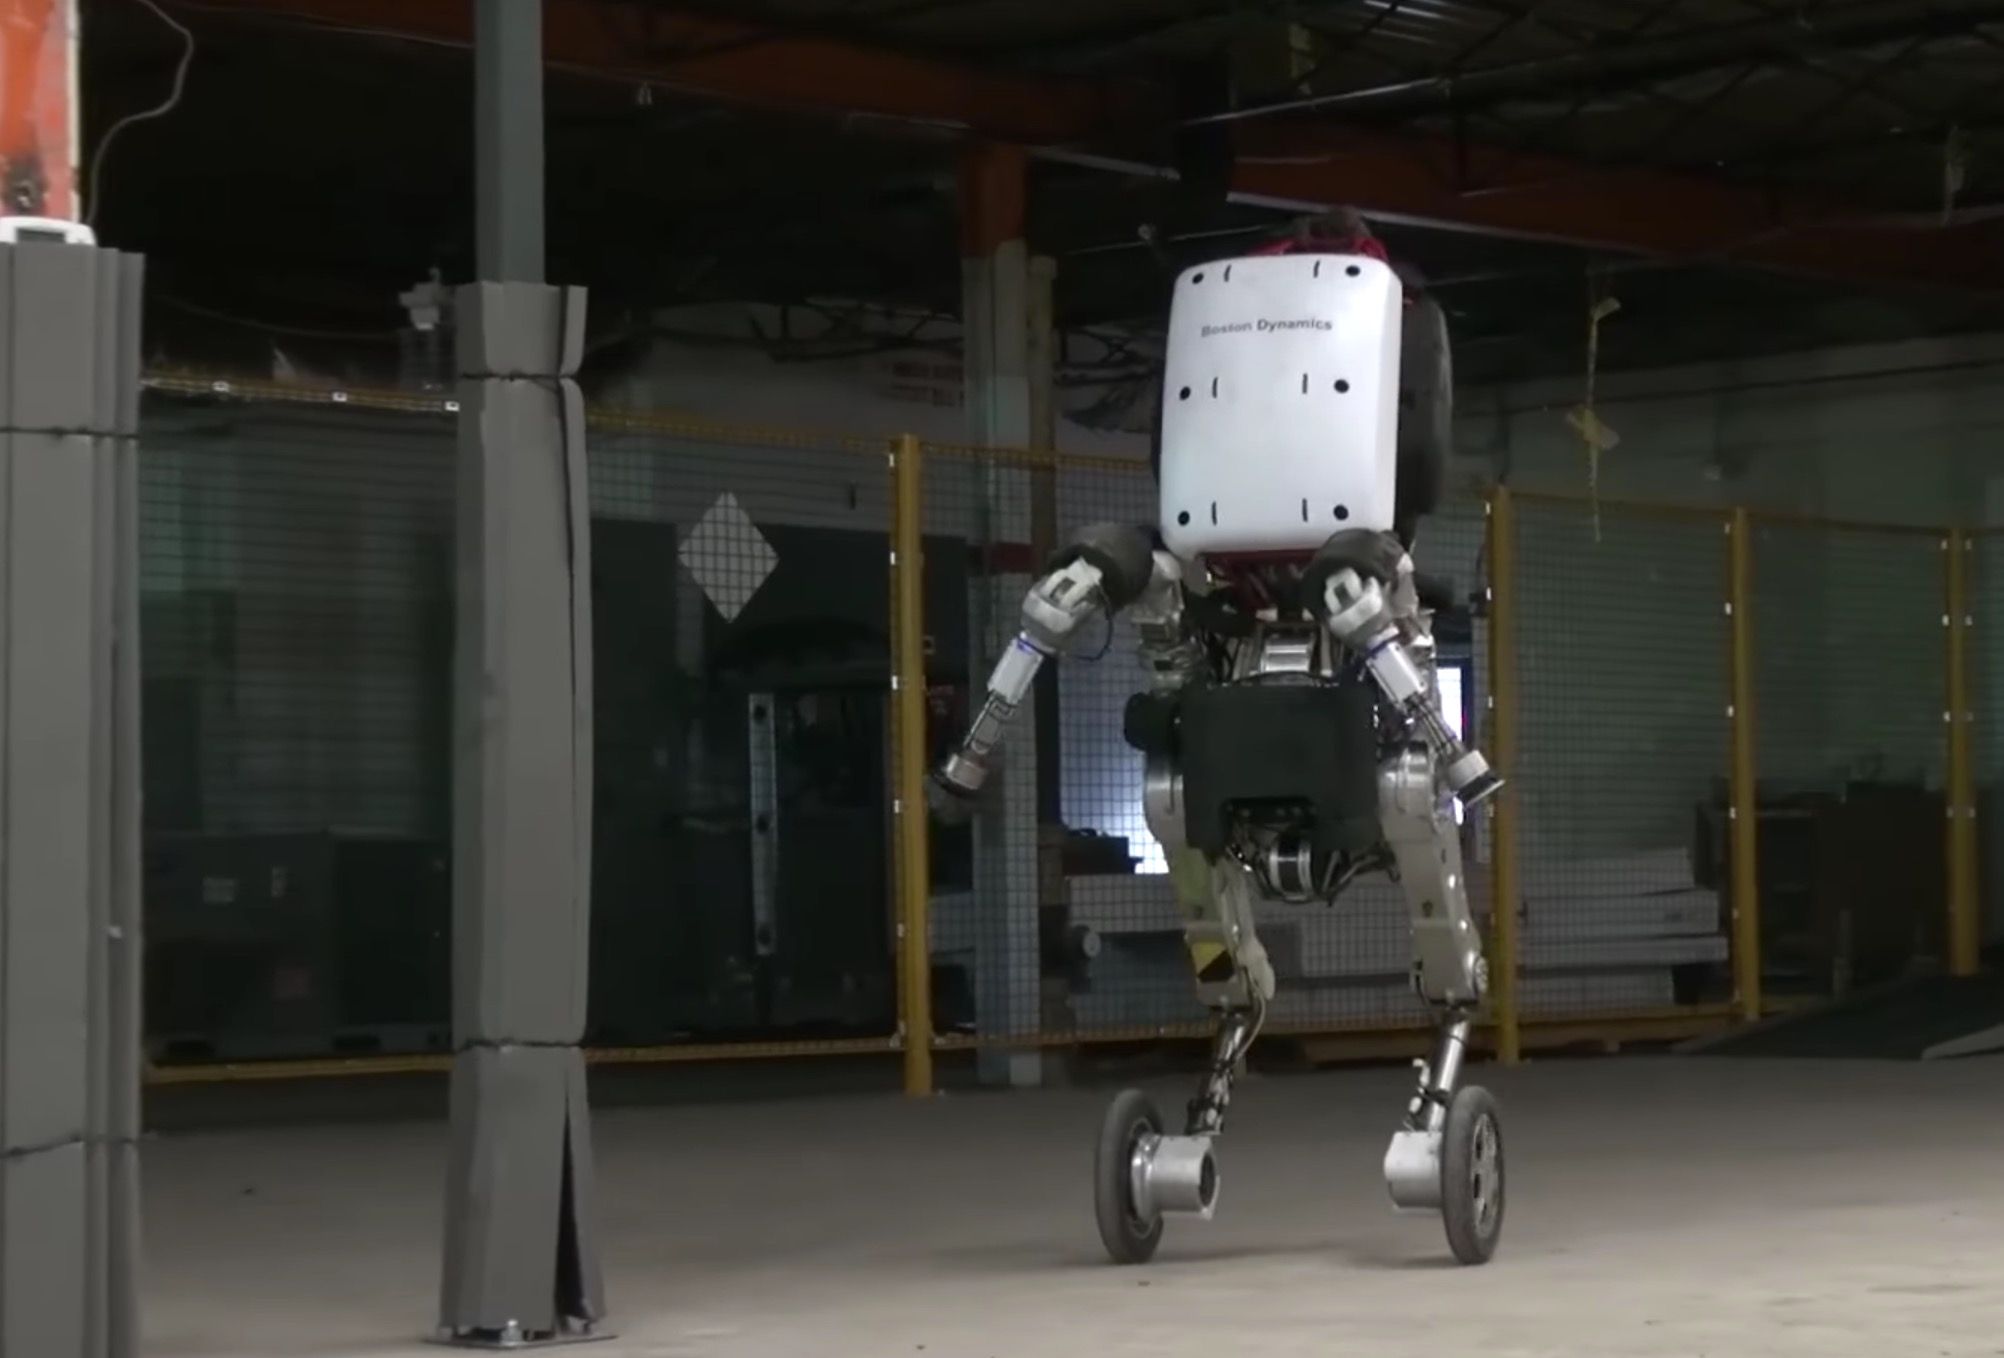 boston dynamics officially shows off nightmare inducing handle robot image 1